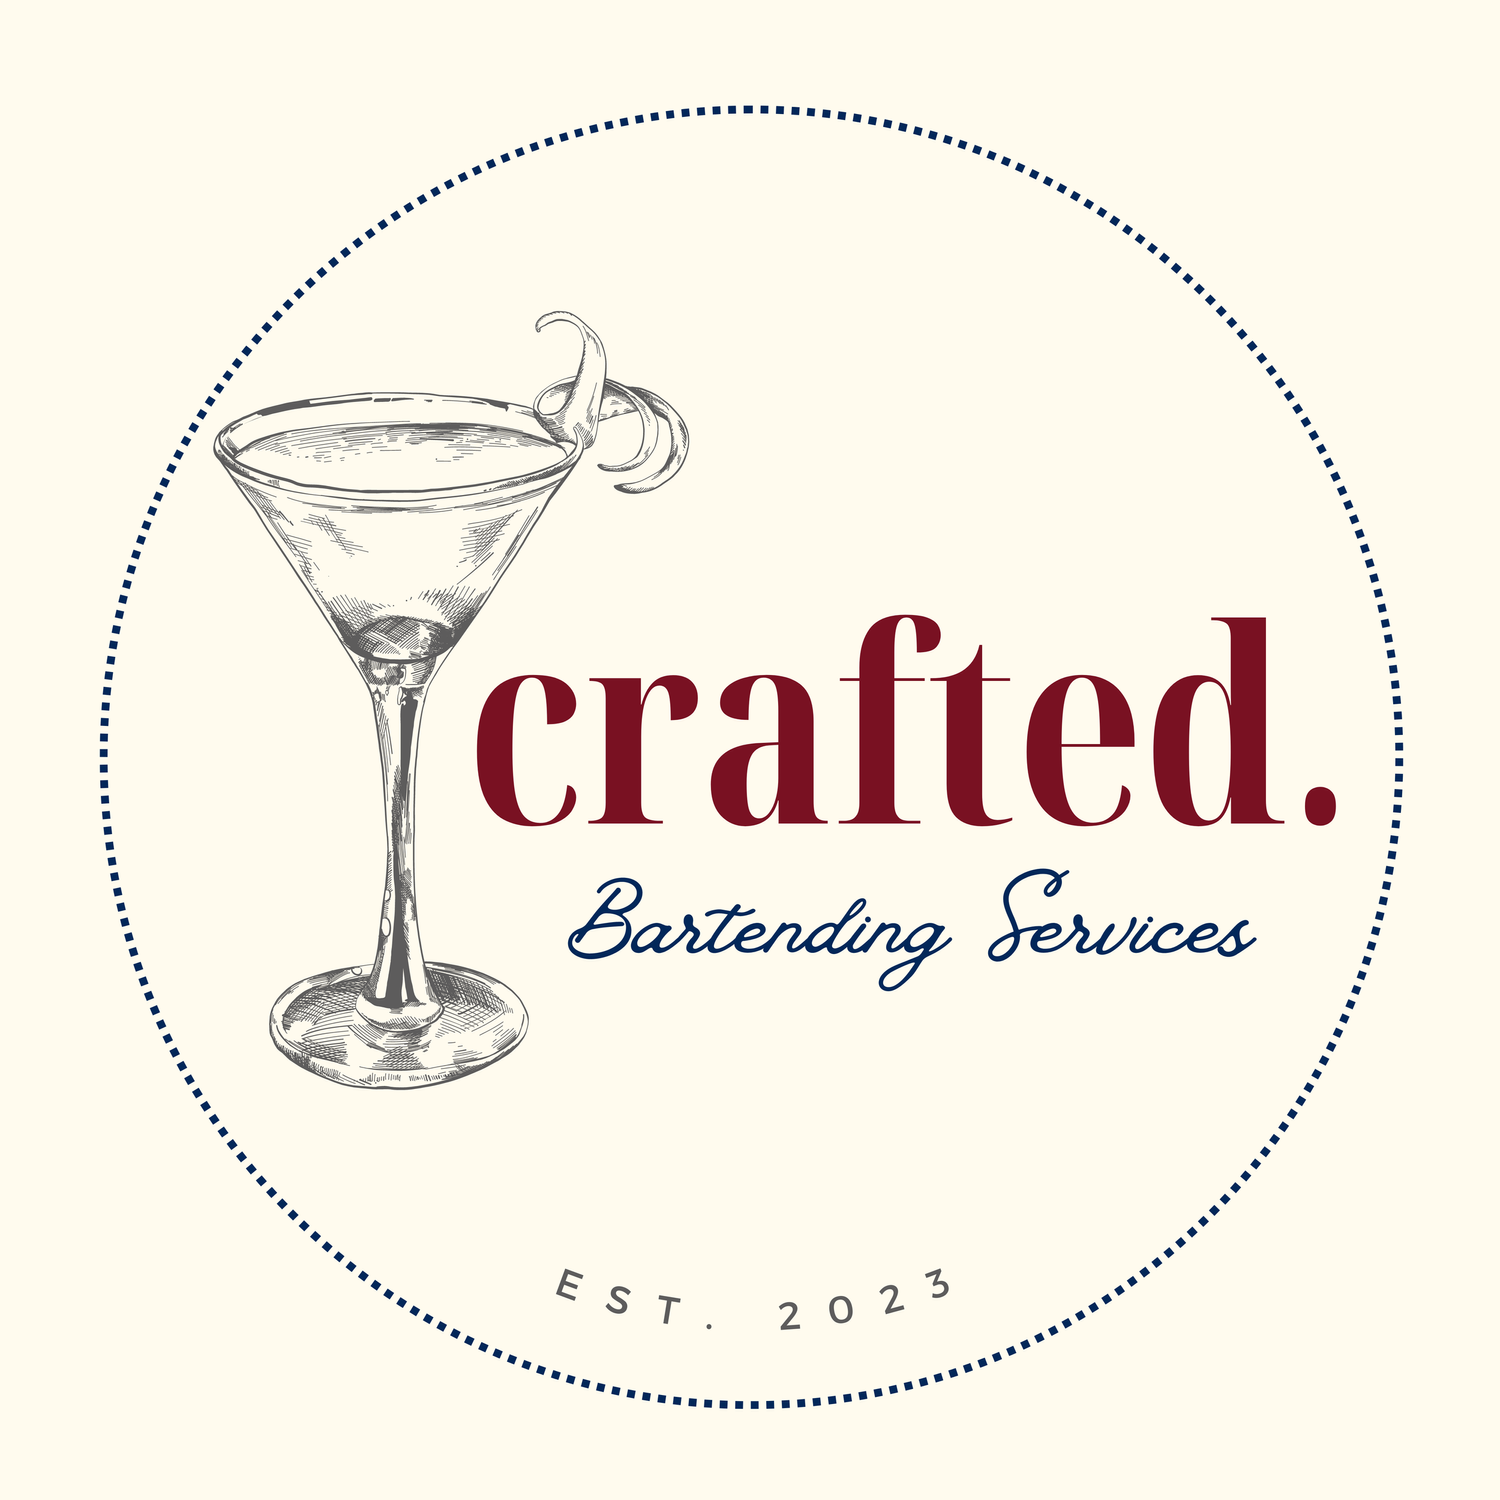 Crafted. Bartending Services